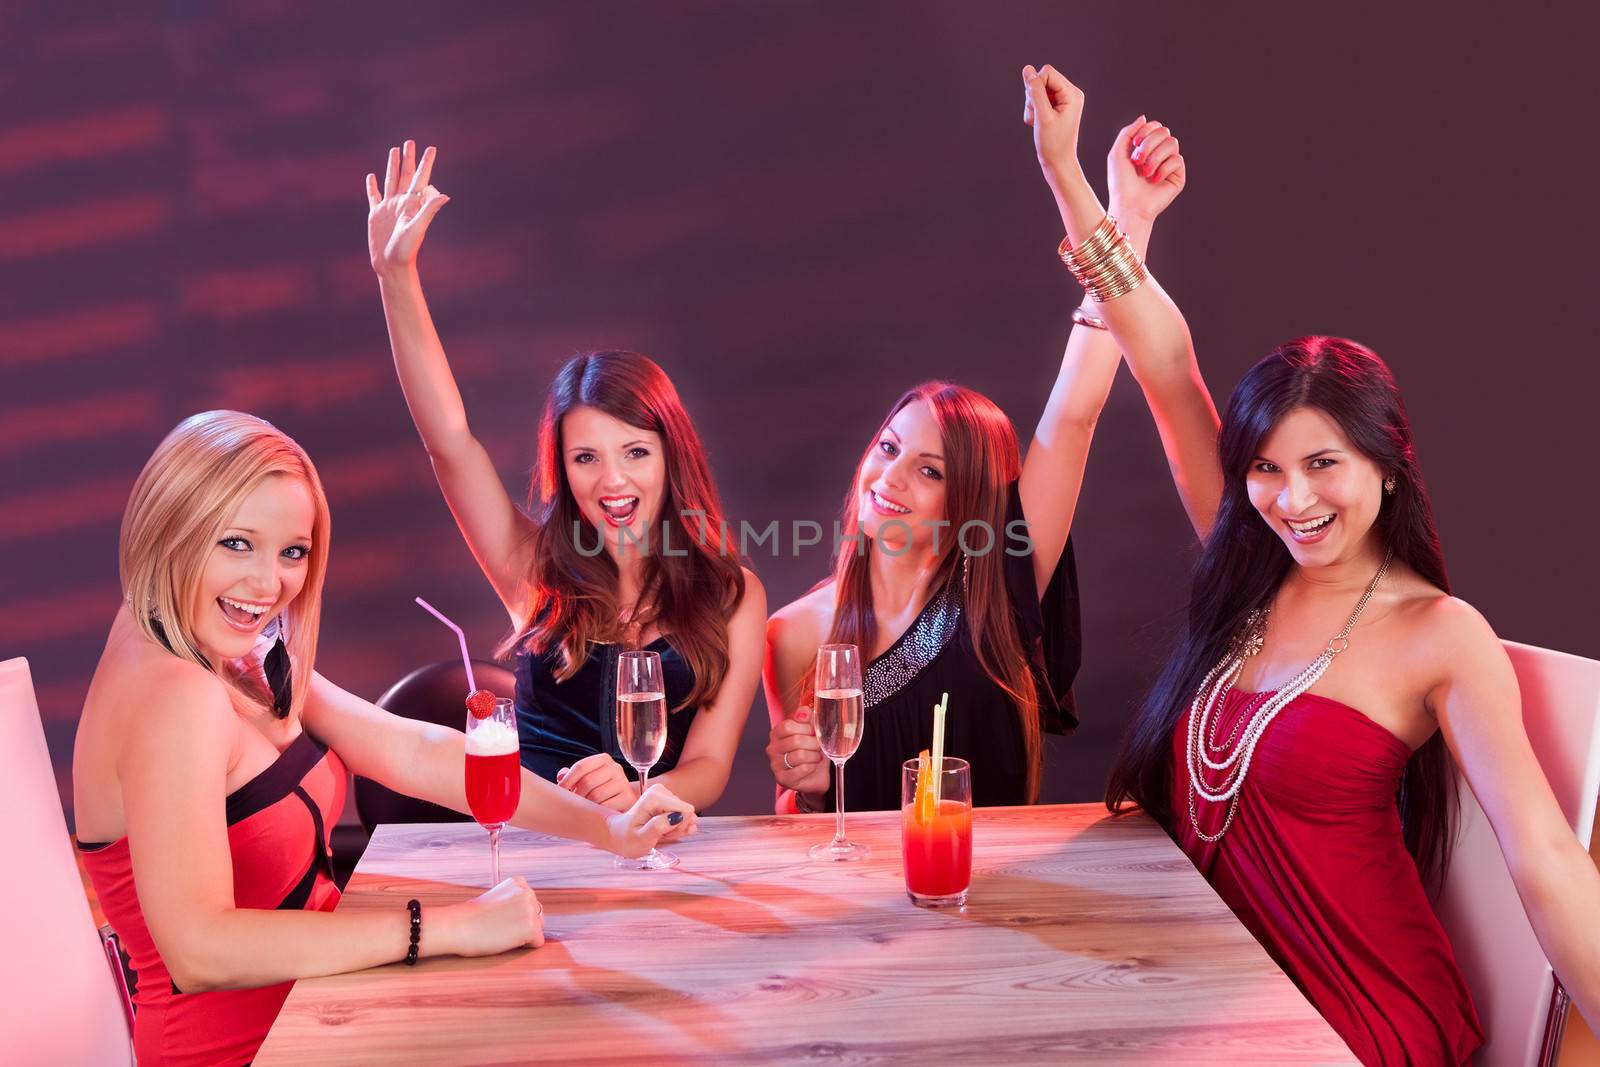 Glamorous young women celebrating in a nightclub sitting around a table laughing and raising their arms in the air in jubilation